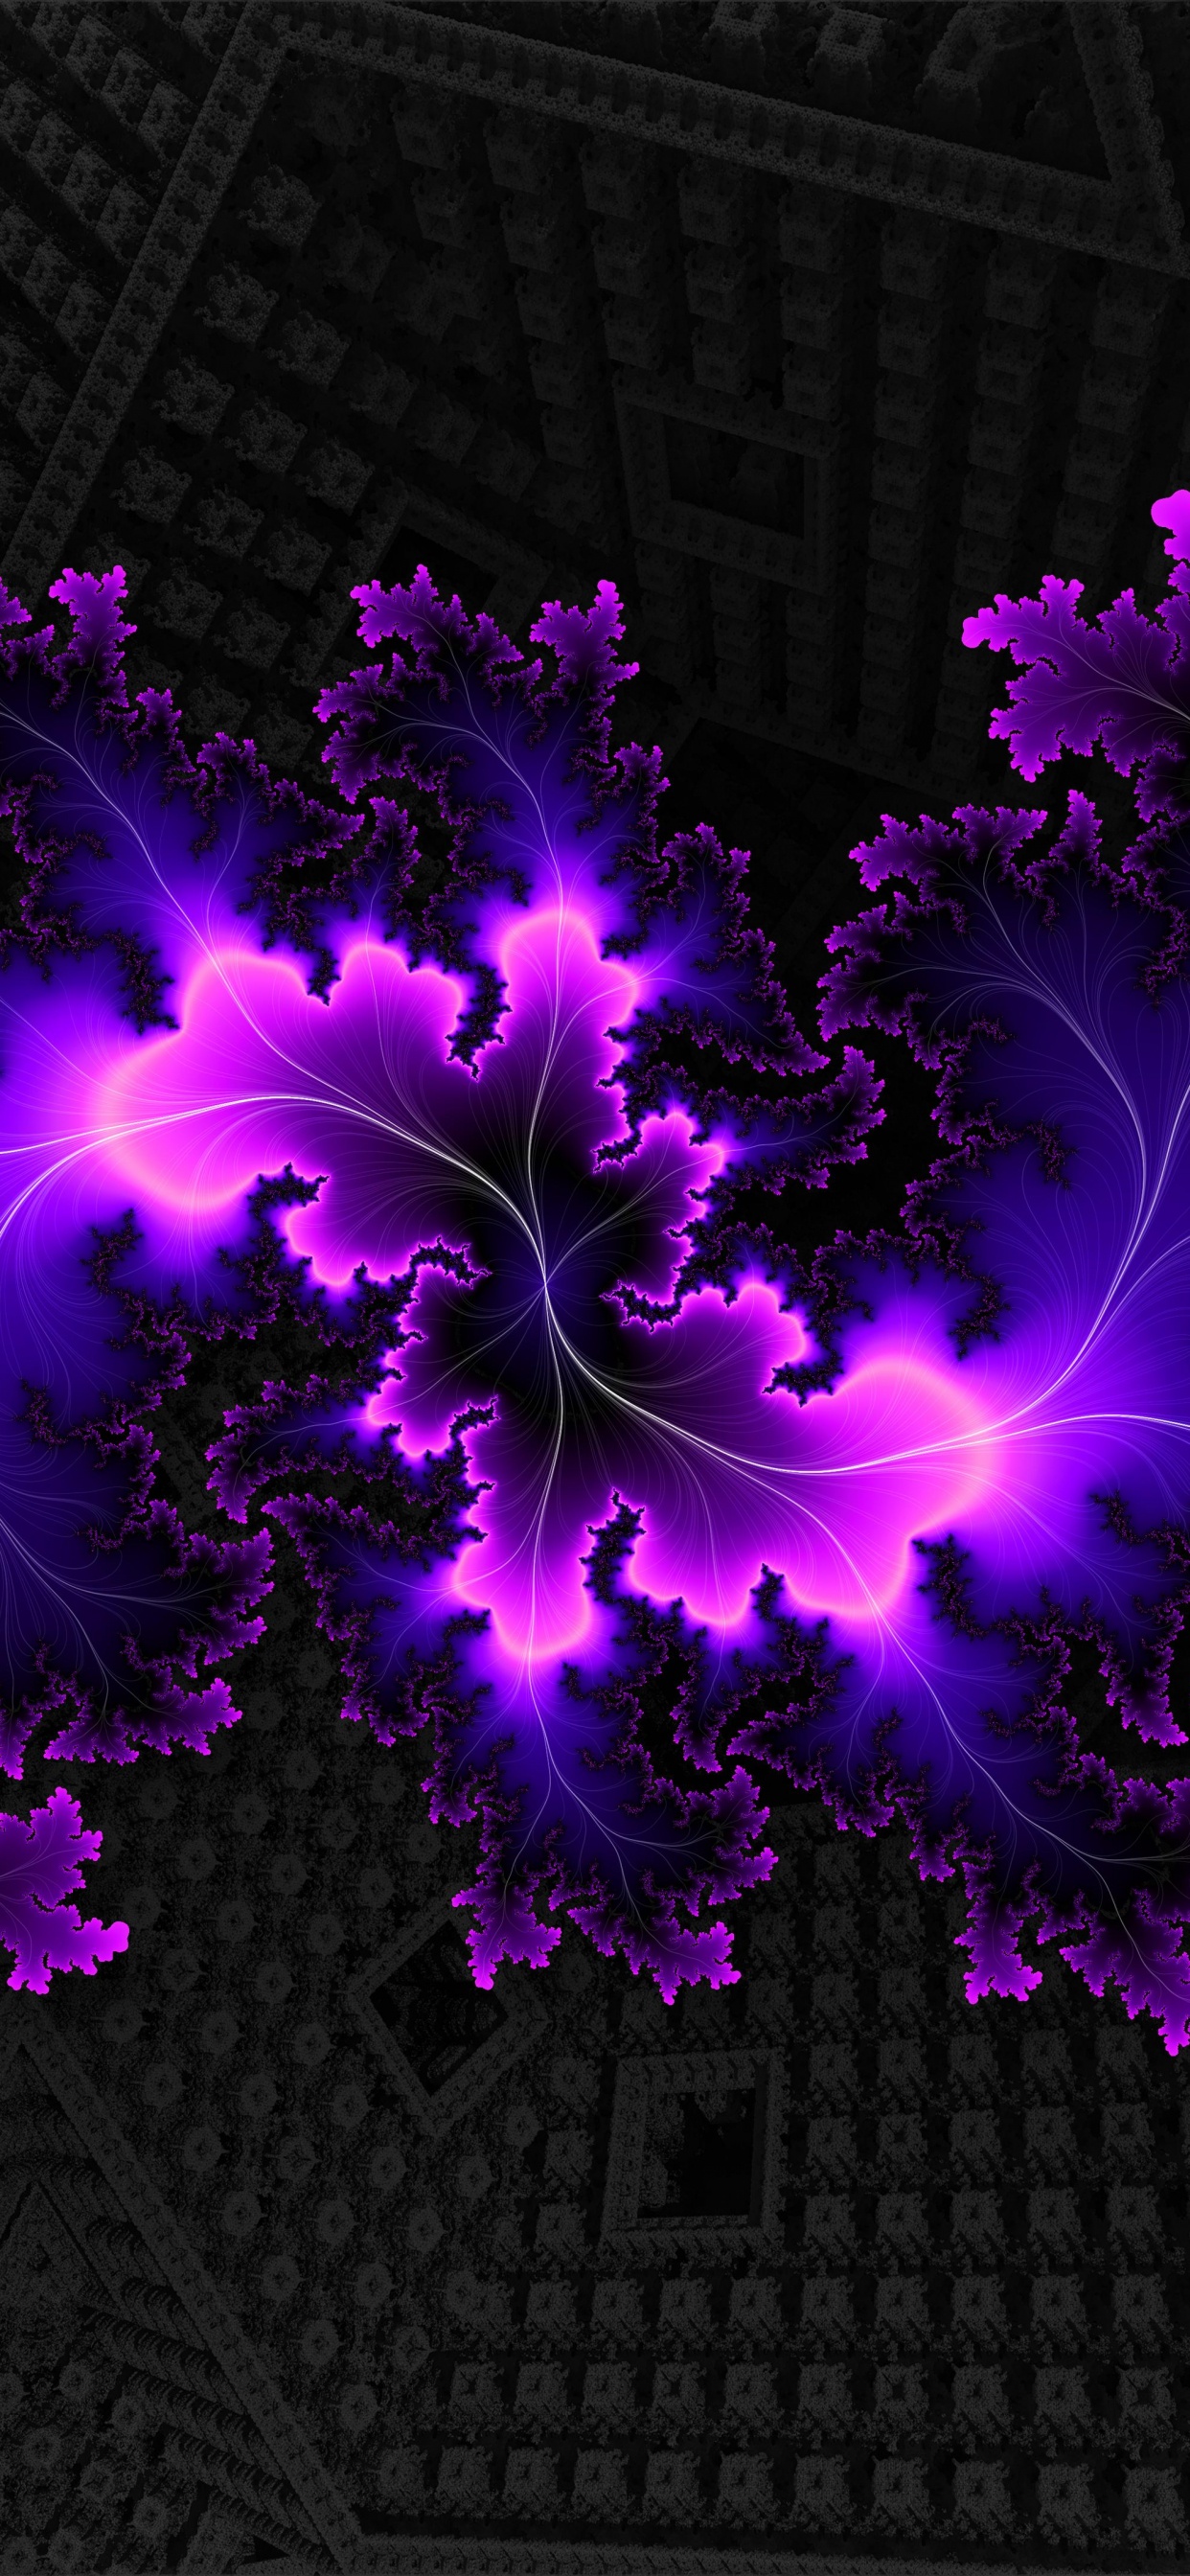 Purple Flower Petals on Black and White Textile. Wallpaper in 1242x2688 Resolution